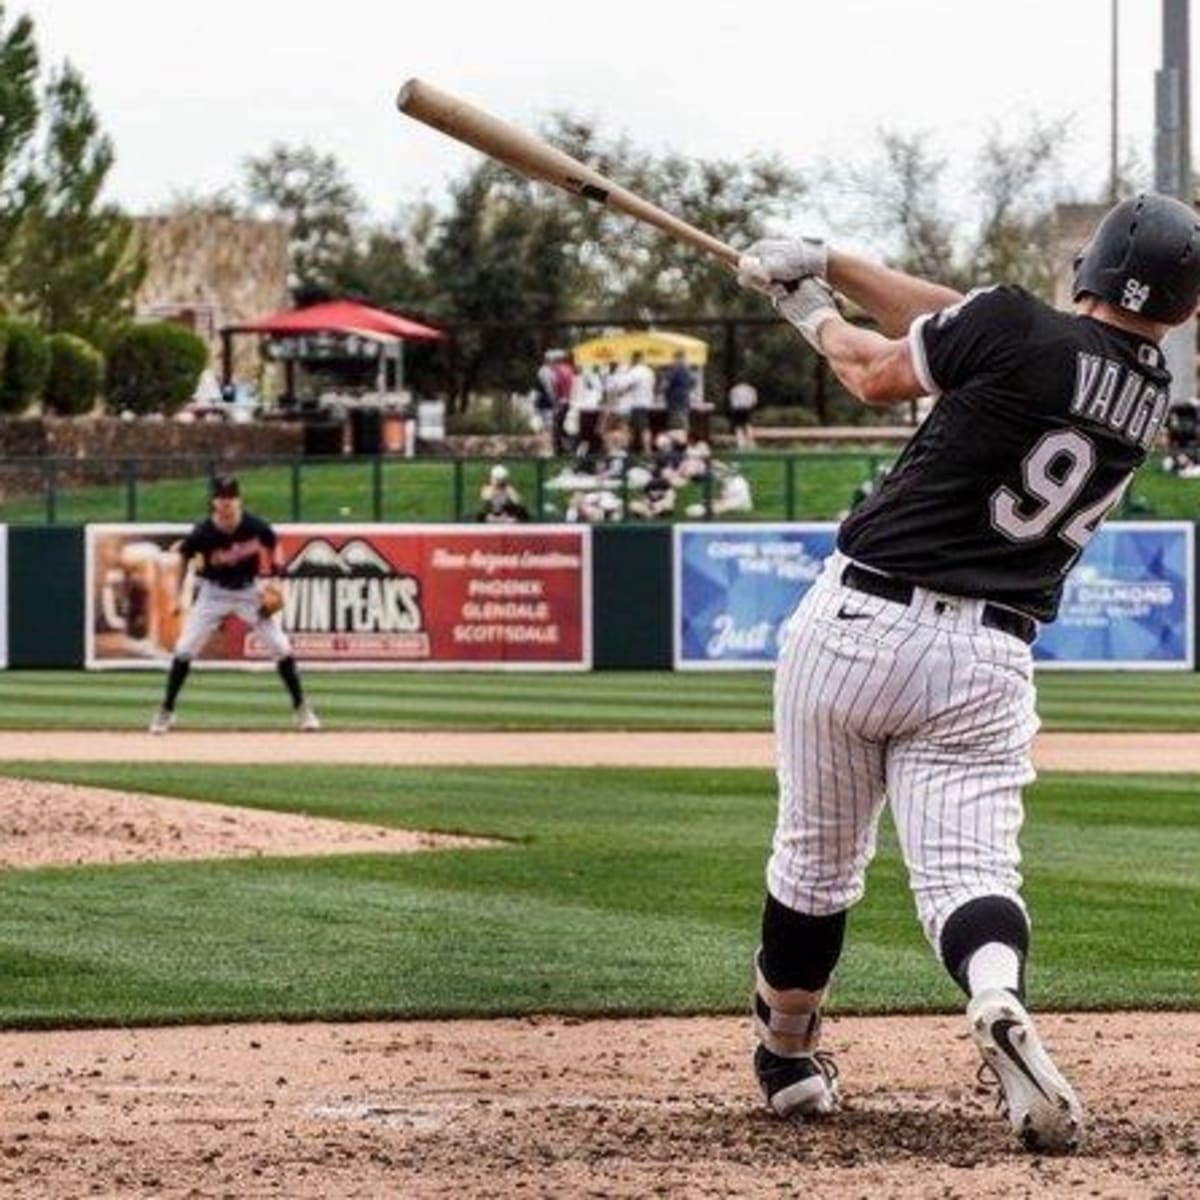 Cal Baseball: Andrew Vaughn Makes Progress in Year 2, But White Sox Miss  Postseason - Sports Illustrated Cal Bears News, Analysis and More